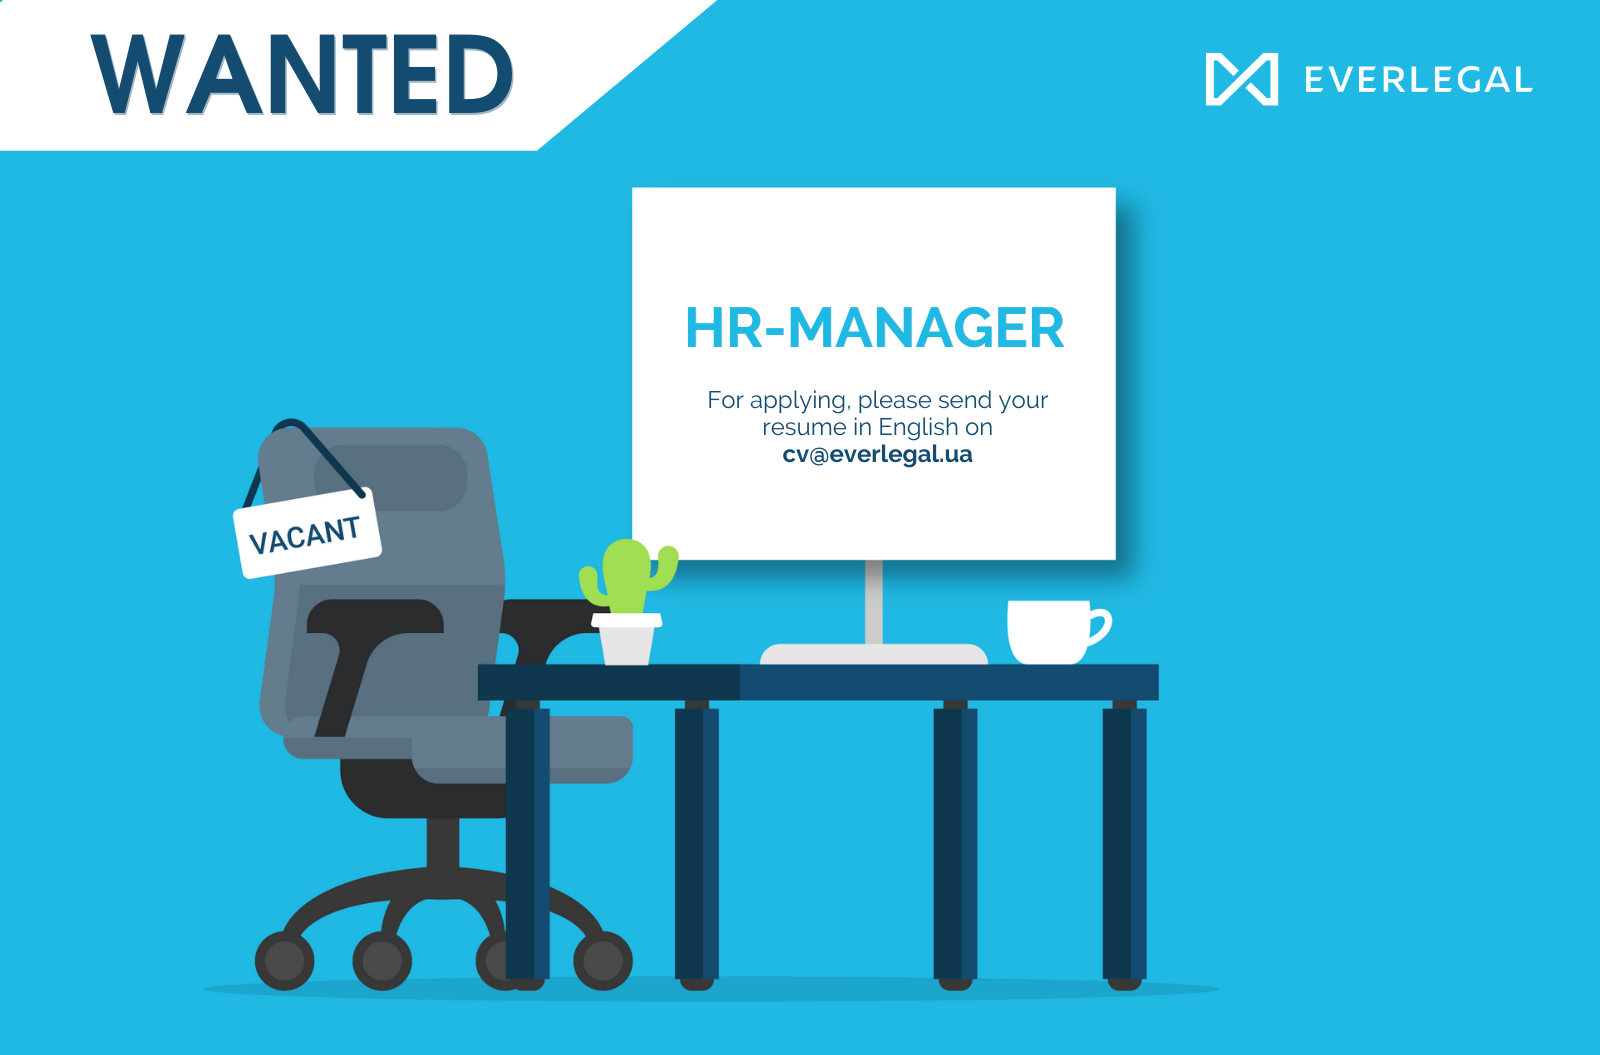 VACANCY: Experienced HR-Manager